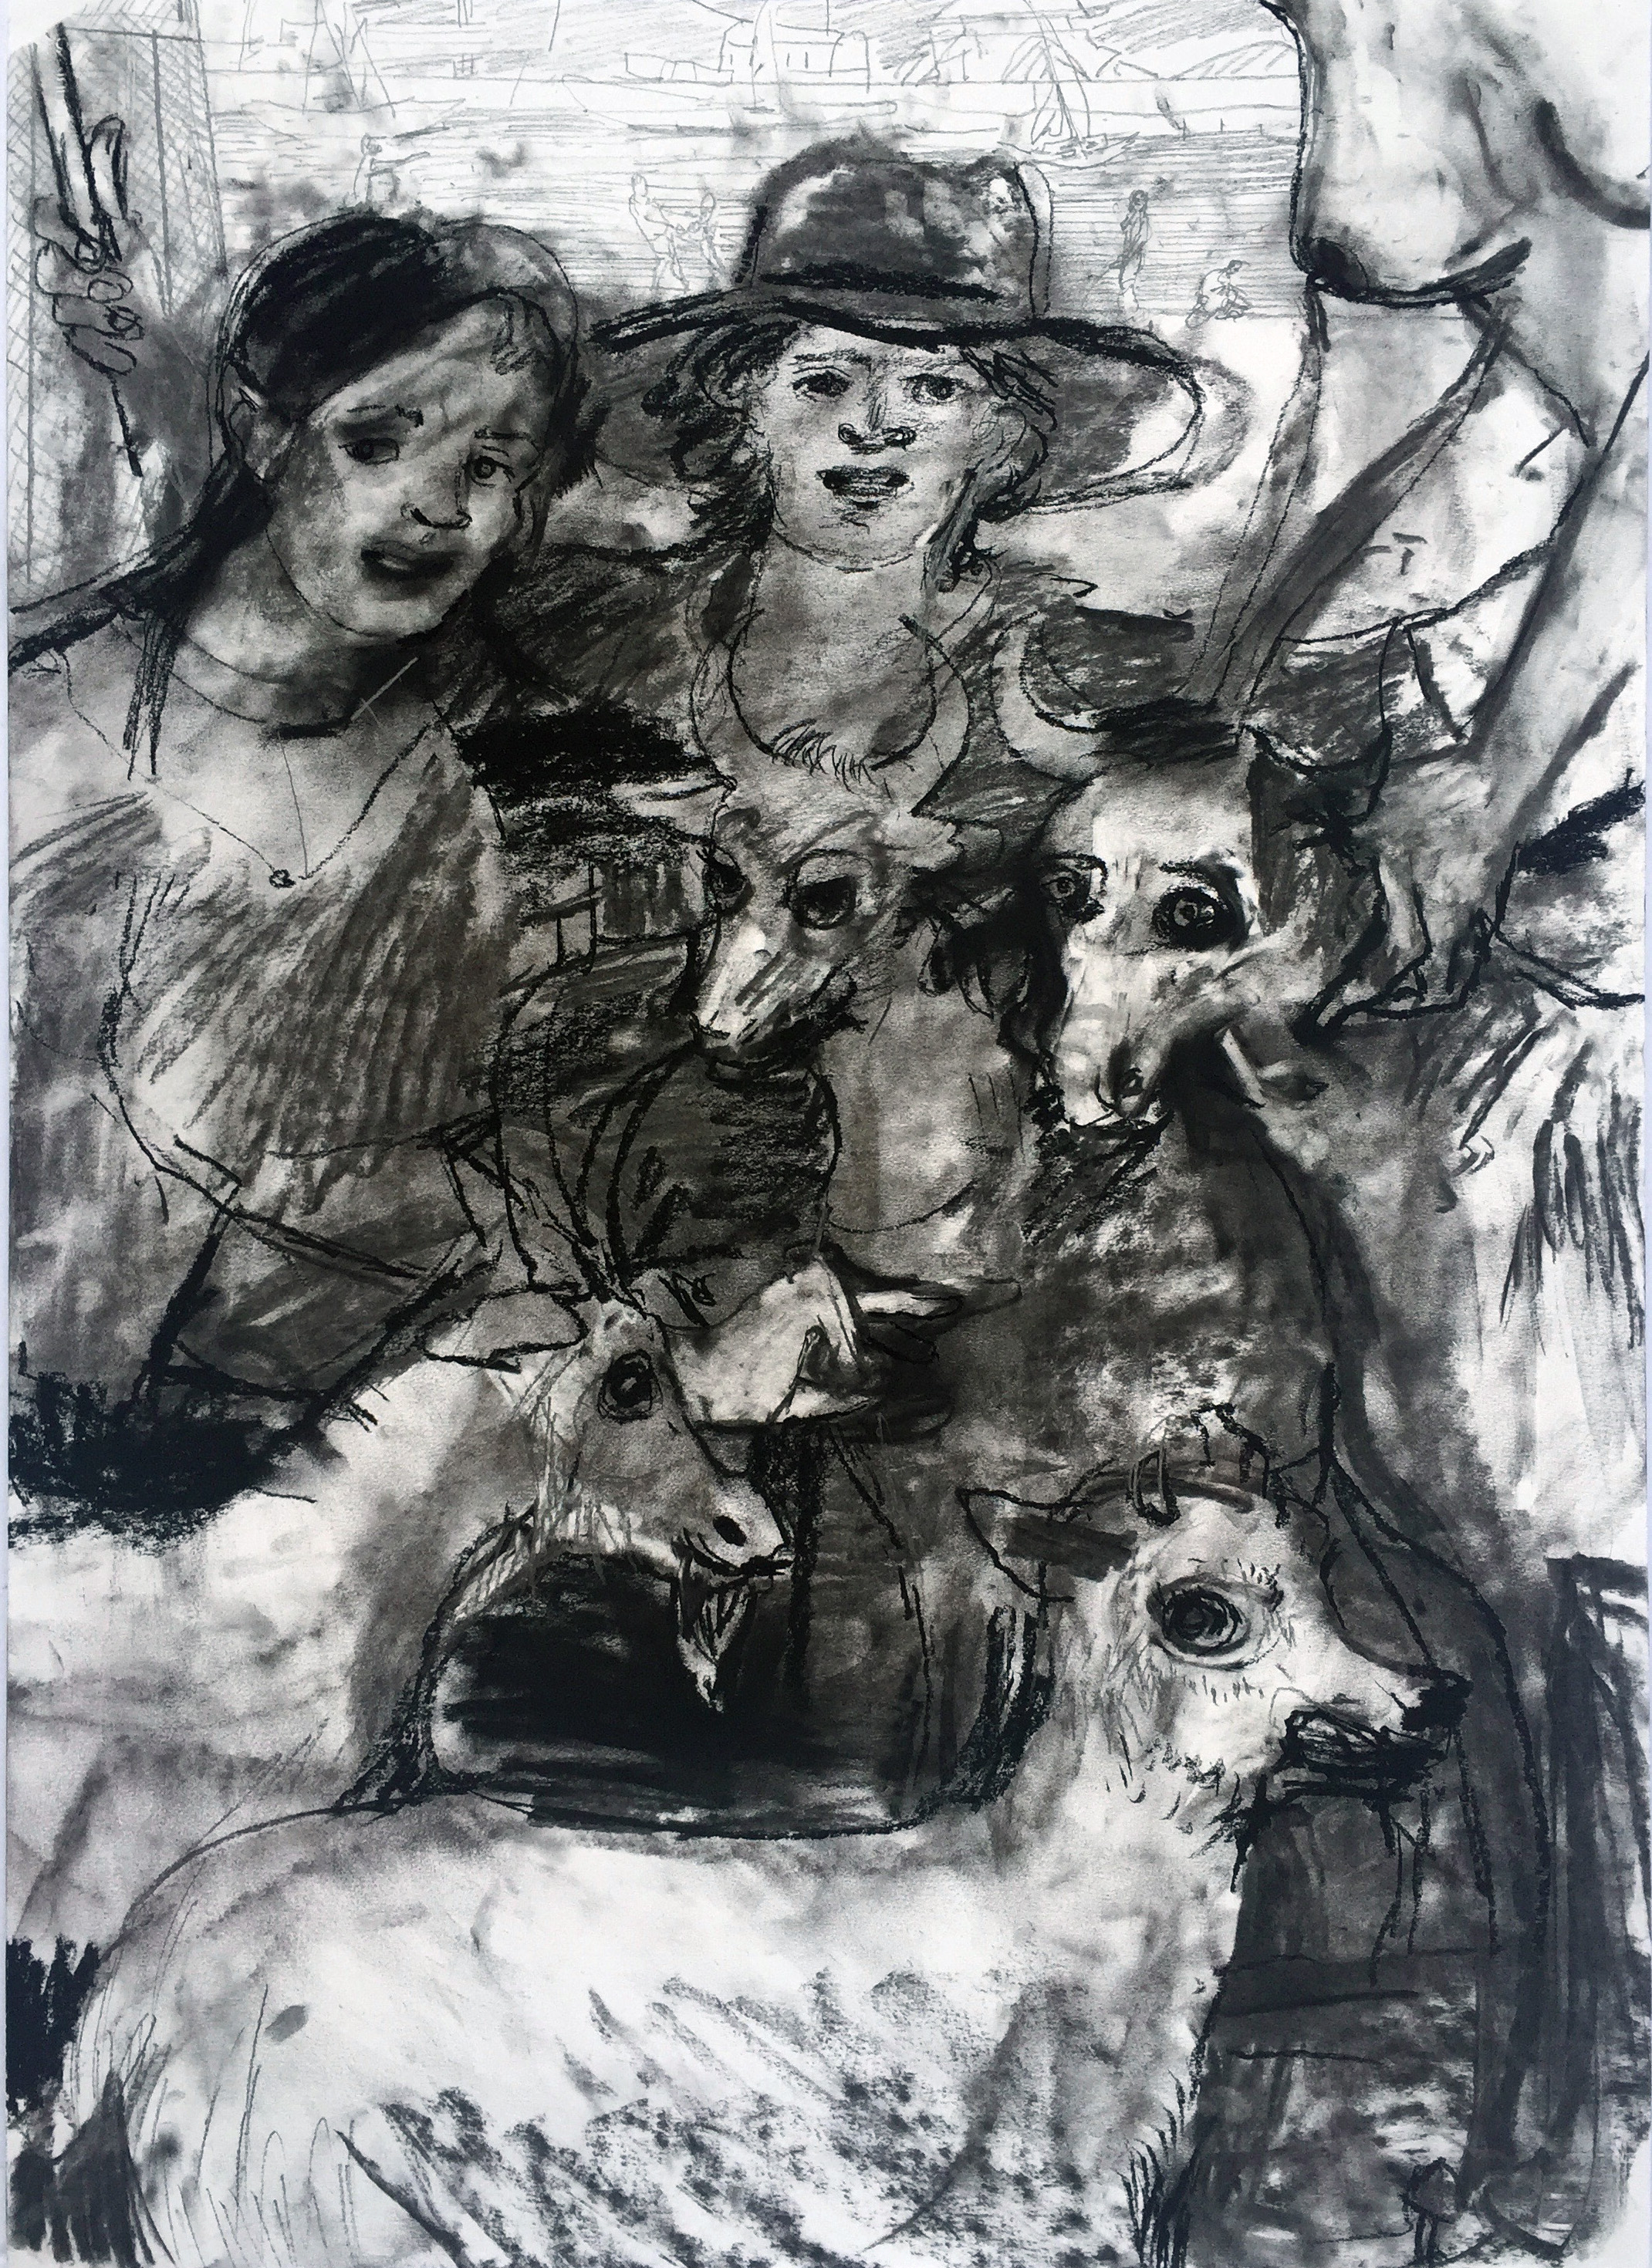 Heard 18 by 24 inches charcoal on paper 2016.jpg